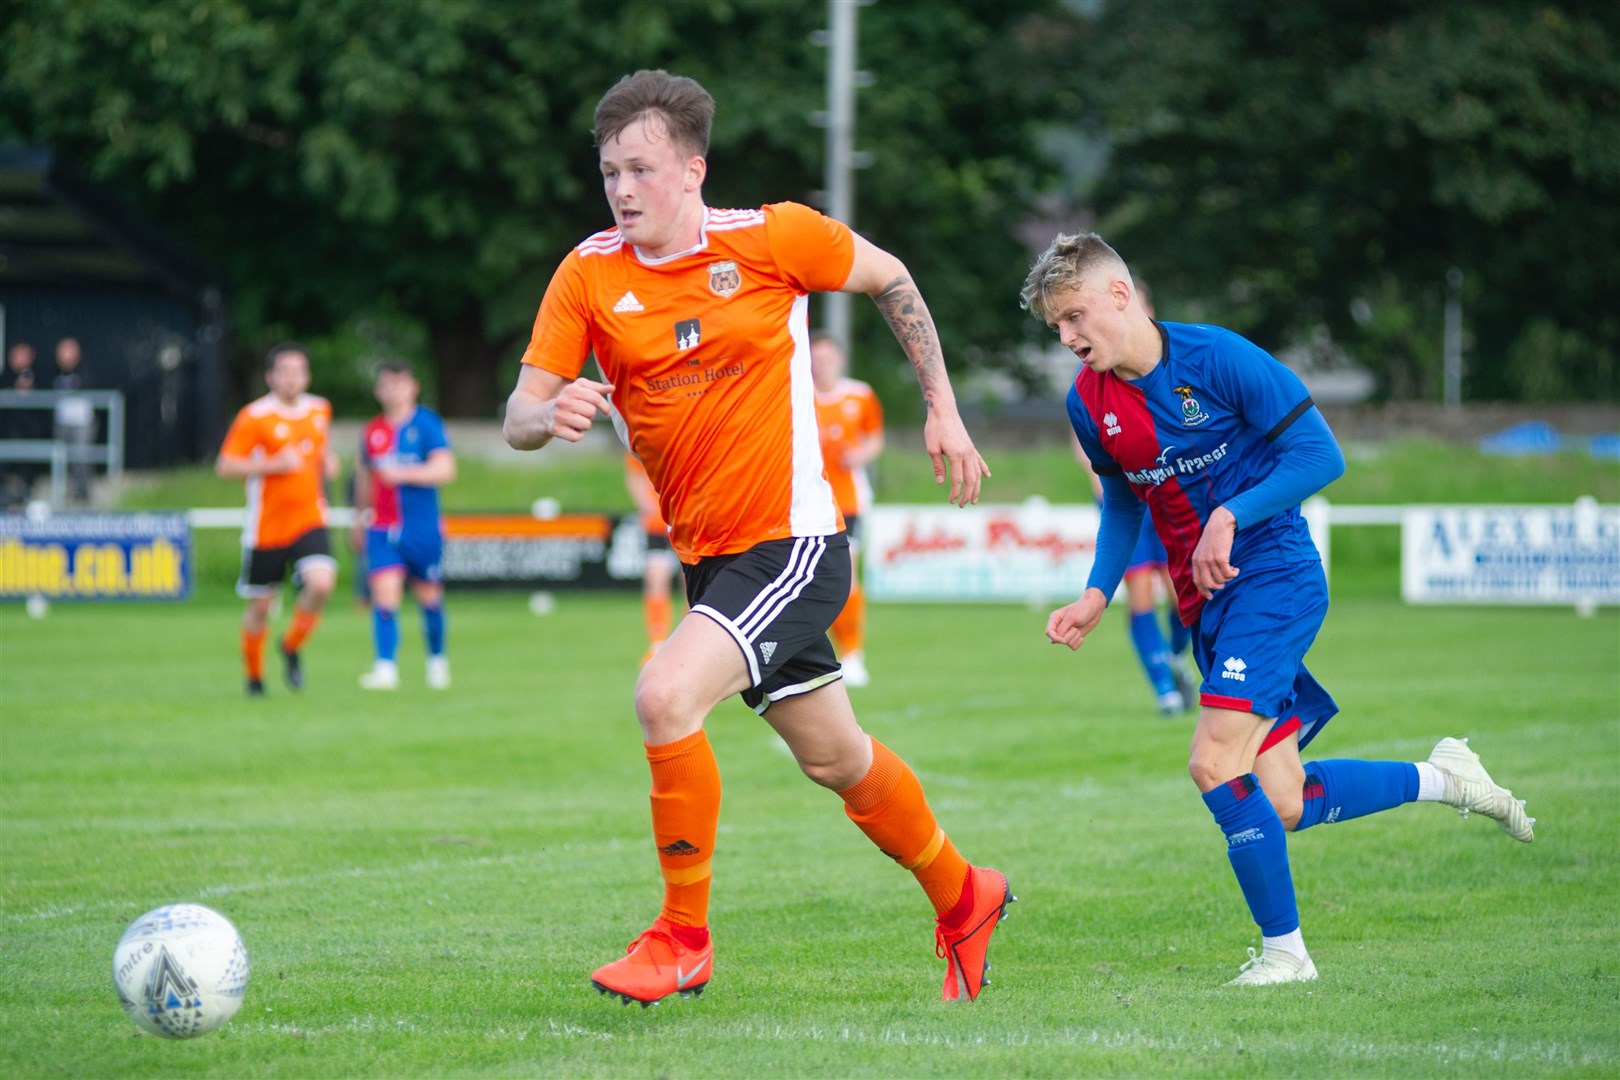 Ryan McRitchie was sent off in Rothes' 3-1 win at Turriff. Picture: Daniel Forsyth